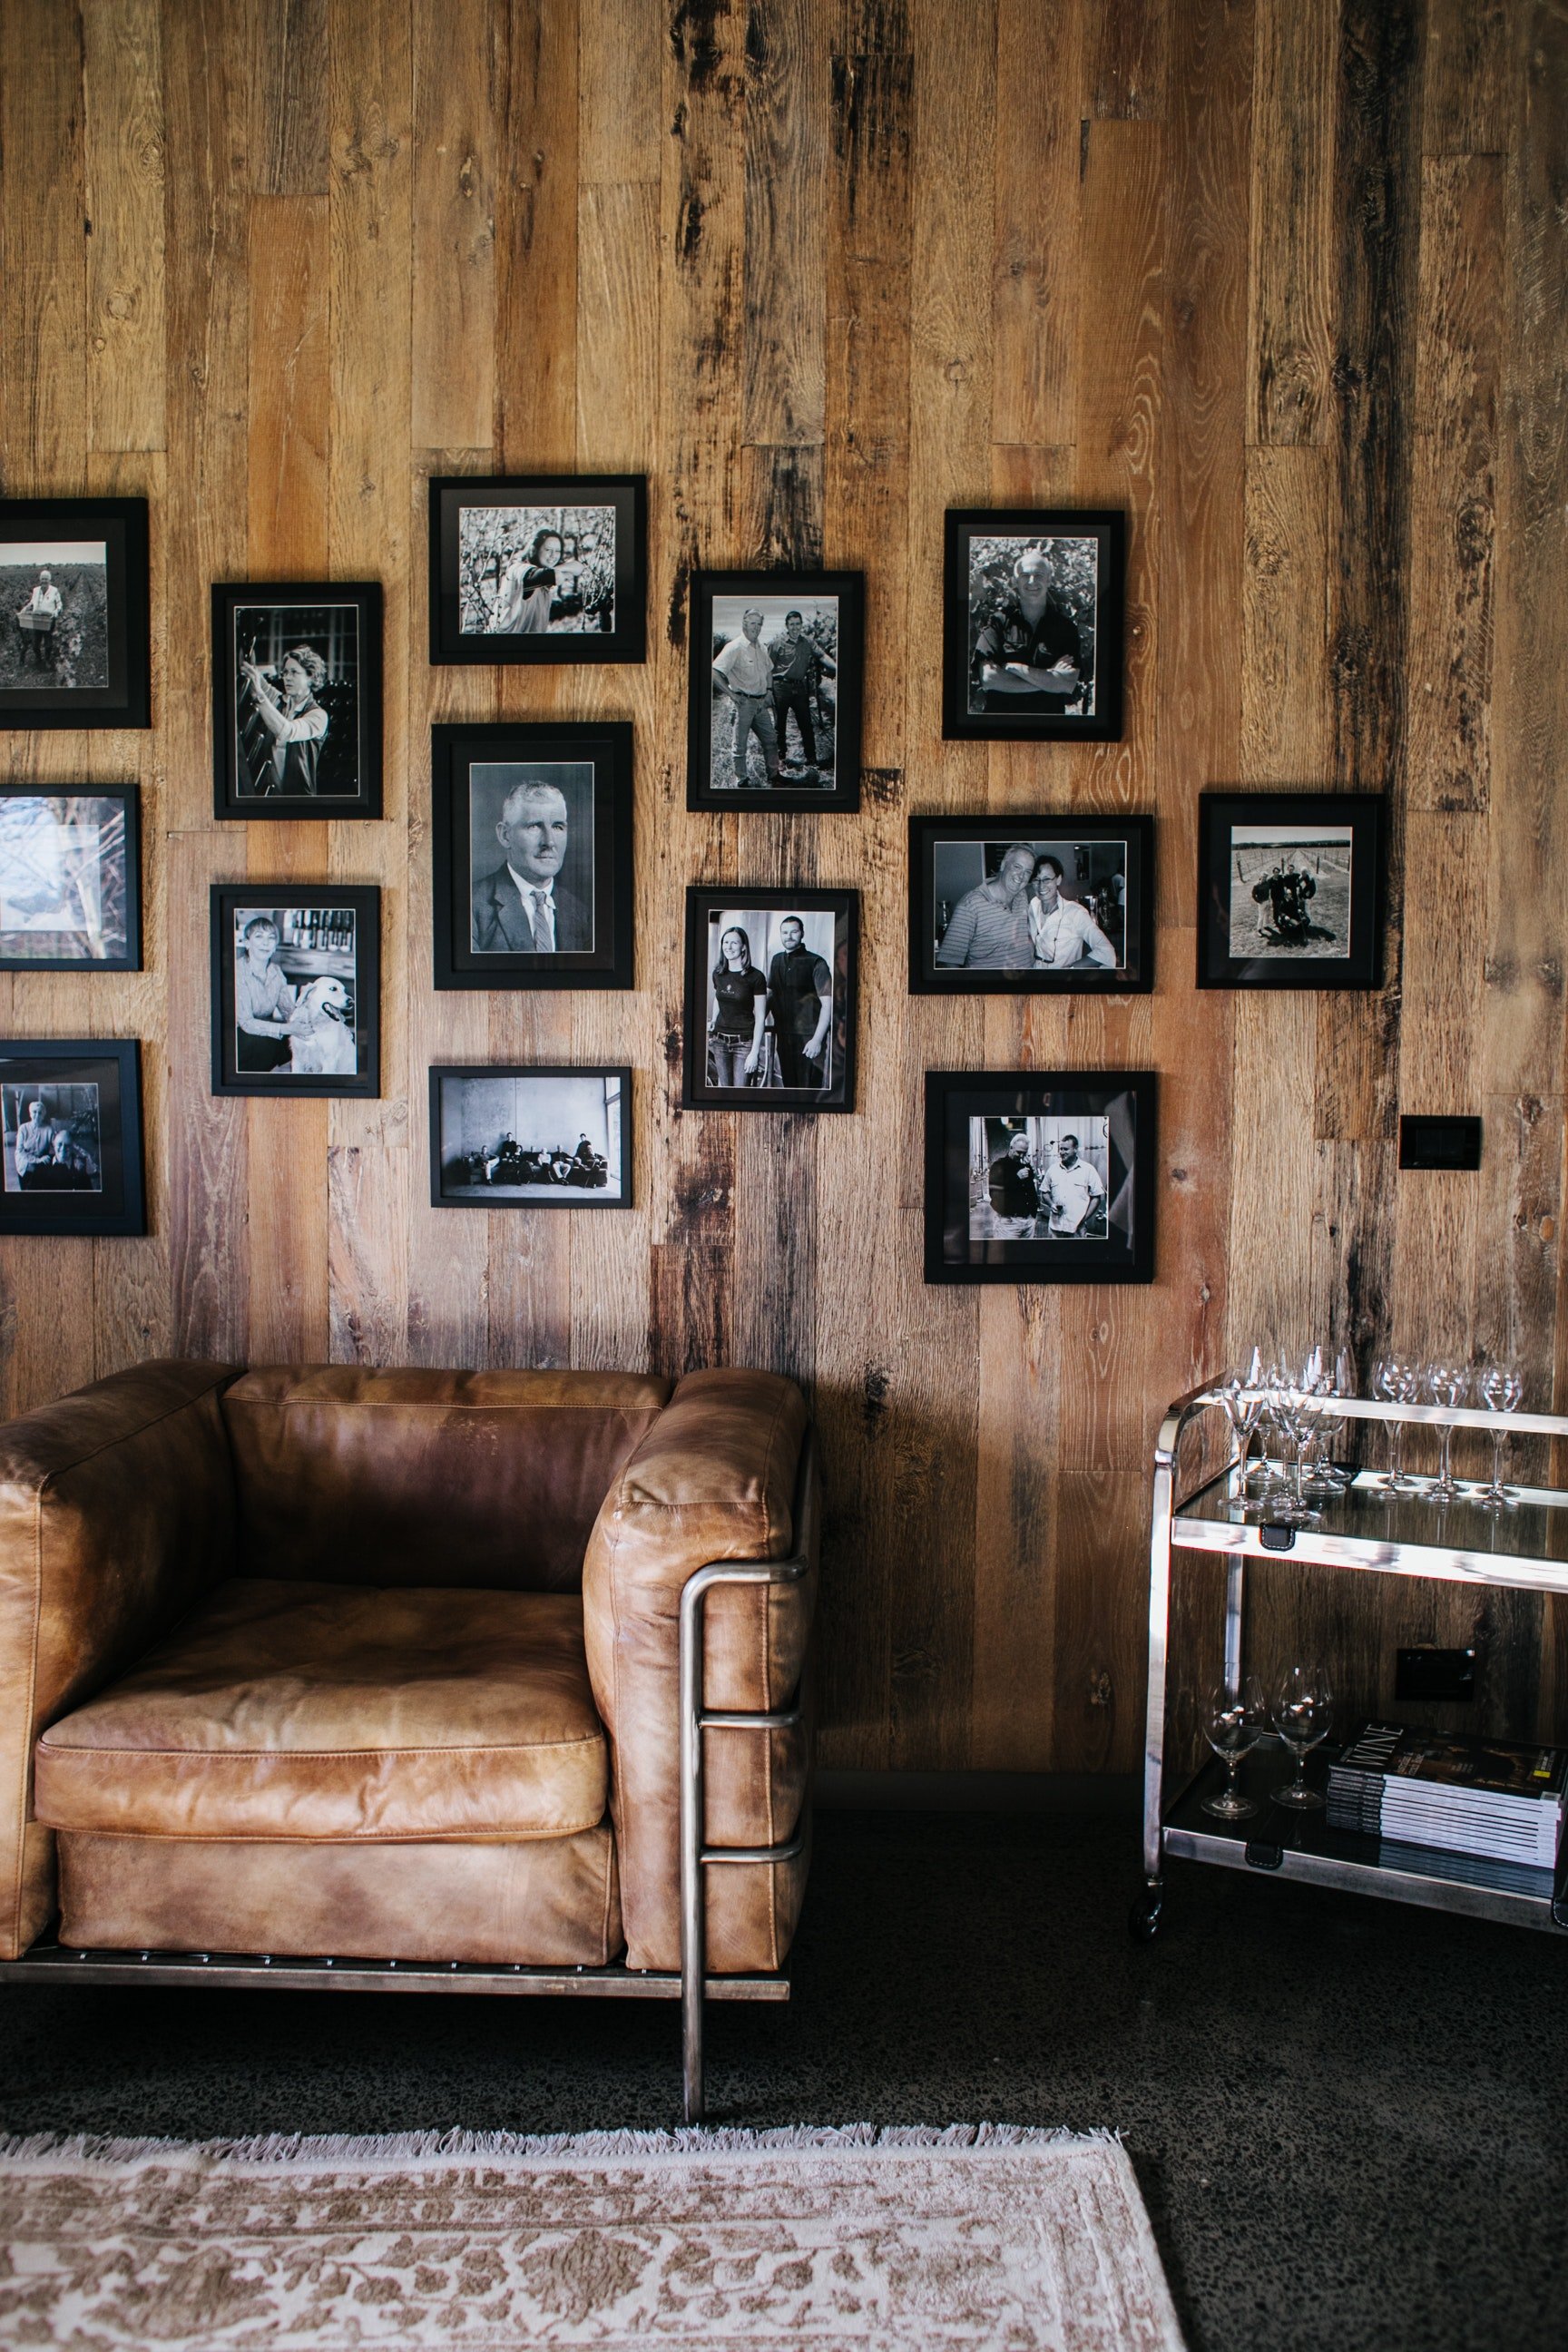 One of the cottage walls was covered with pictures. | Source: Pexels